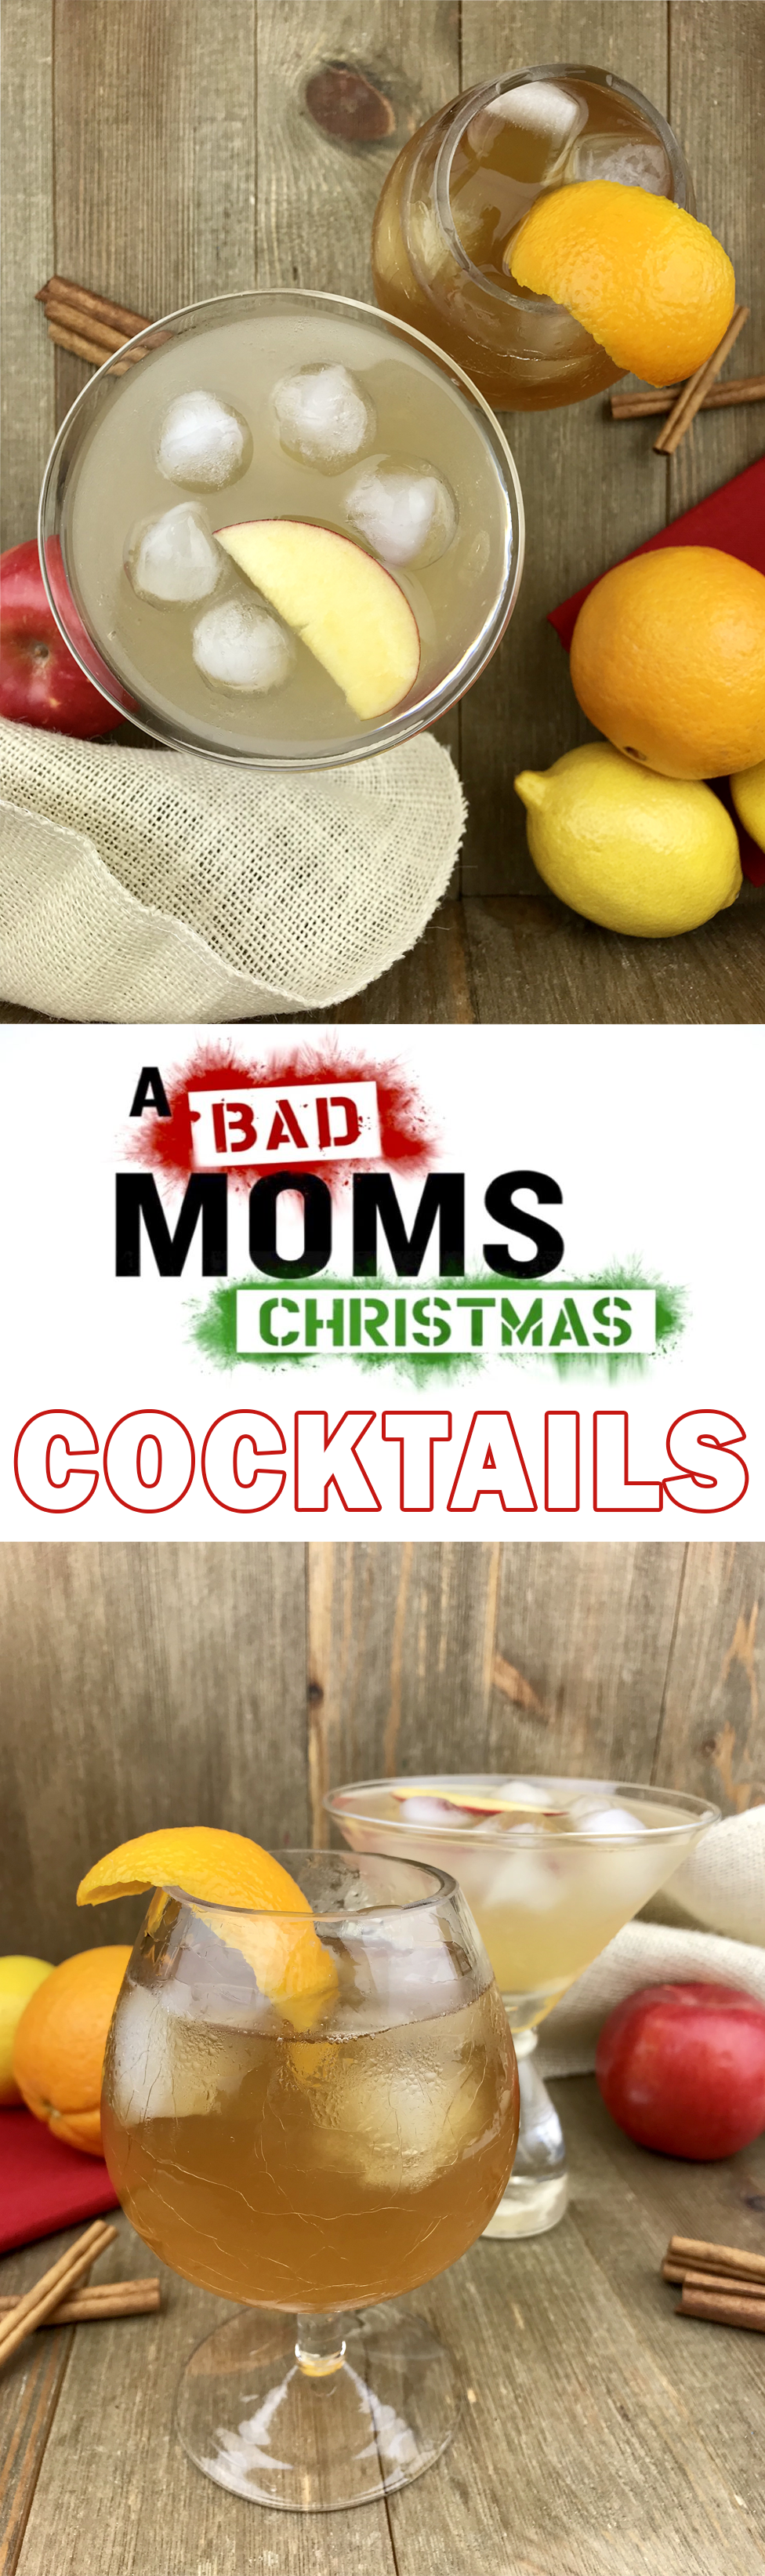 A Bad Moms Christmas Cocktails